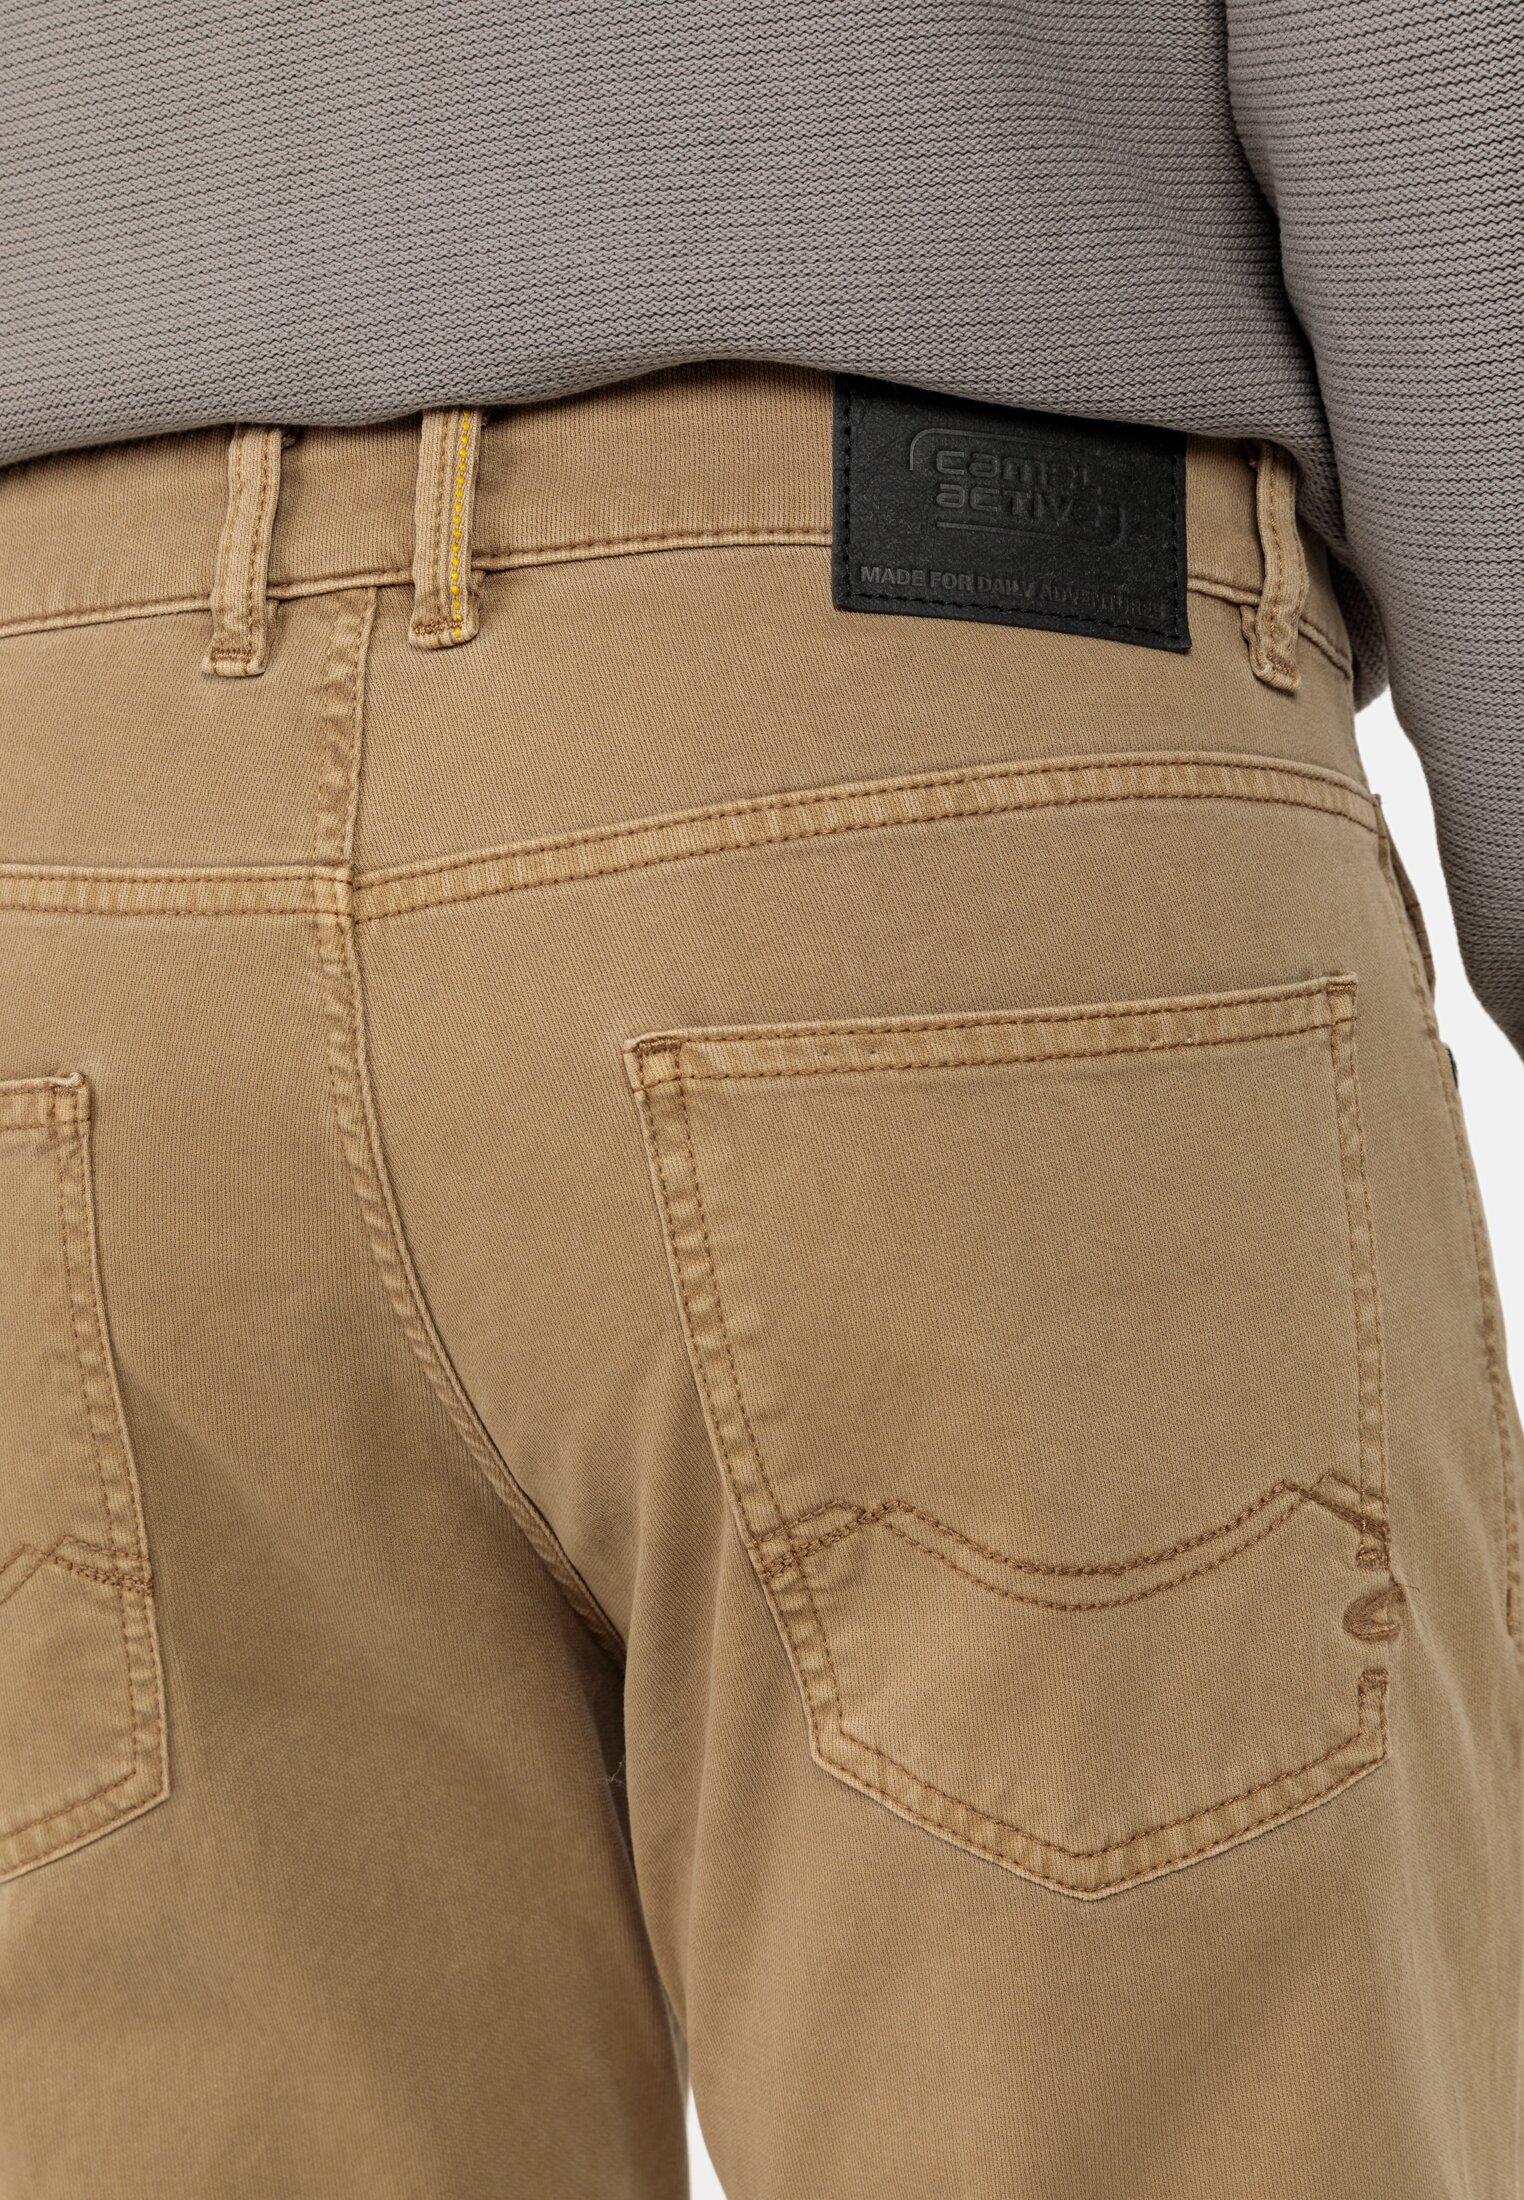 Relaxed Fit for Herren in Brown | 34/32 | camel active